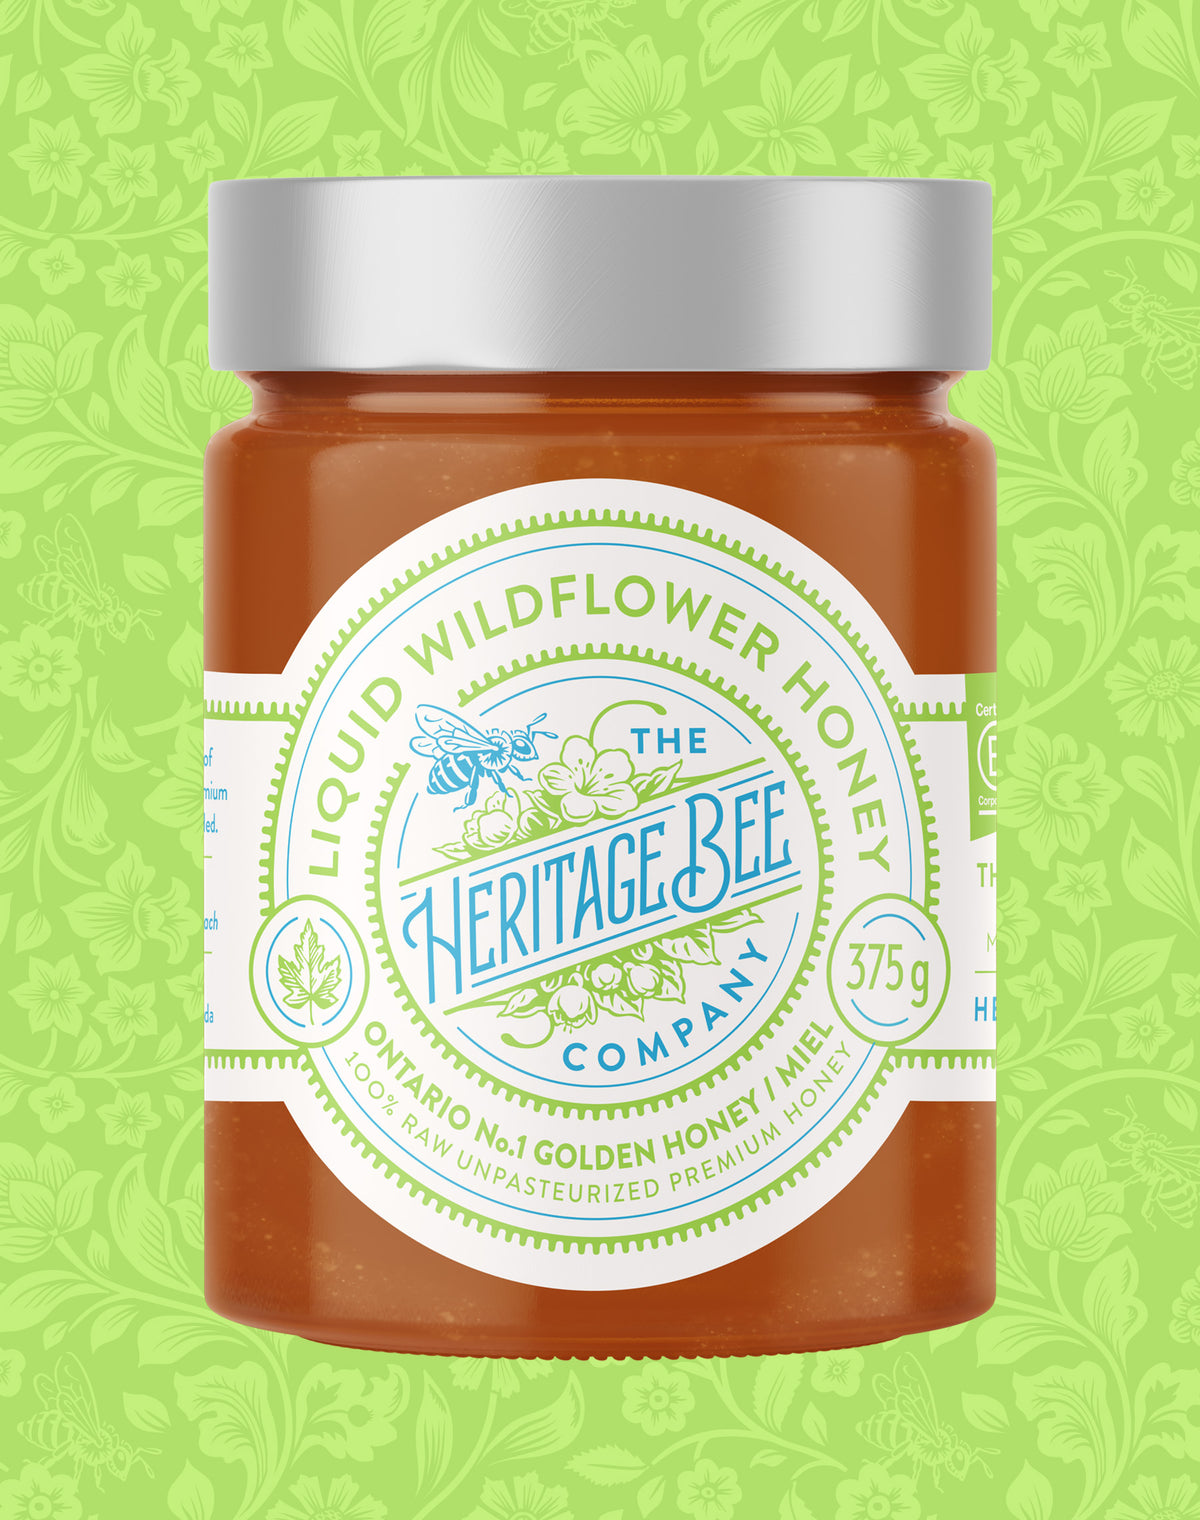 Heritage Bee Co's handcrafted premium Ontario liquid wildflower honey. Raw and unpasteurized honey harvested from fully traceable hives located along the Niagara Escarpment.